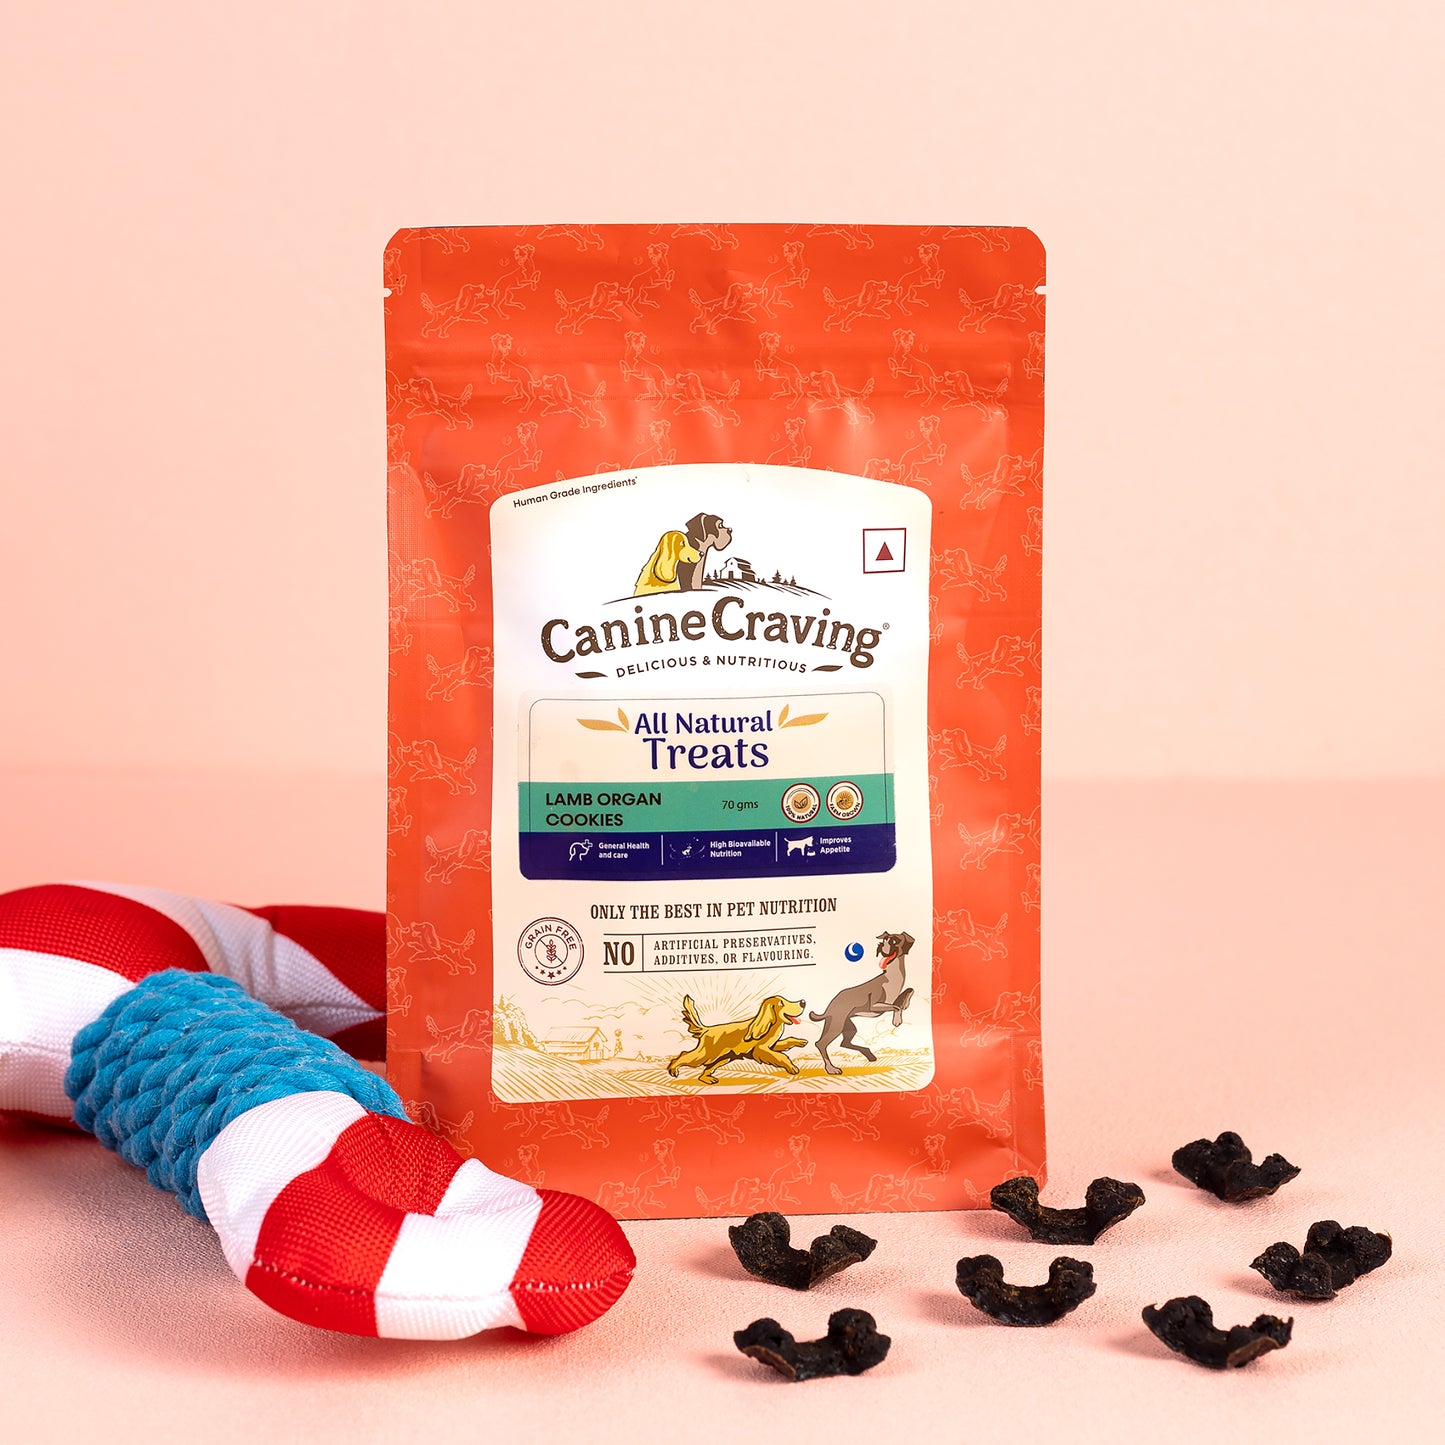 Canine Craving Dehydrated Lamb Organ Cookies - 70g